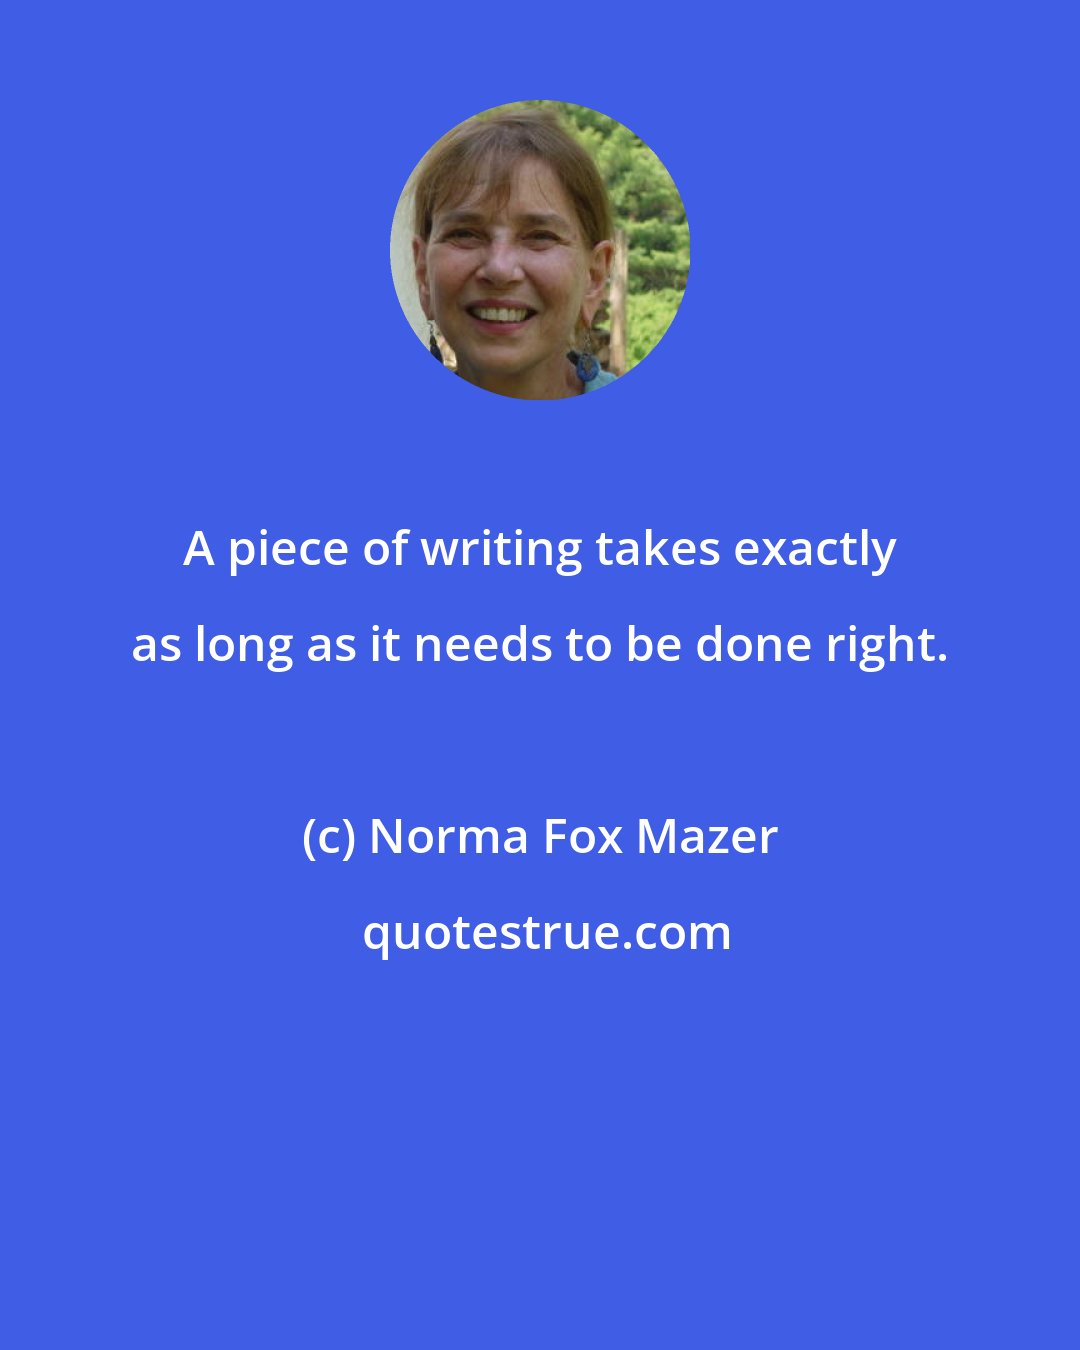 Norma Fox Mazer: A piece of writing takes exactly as long as it needs to be done right.